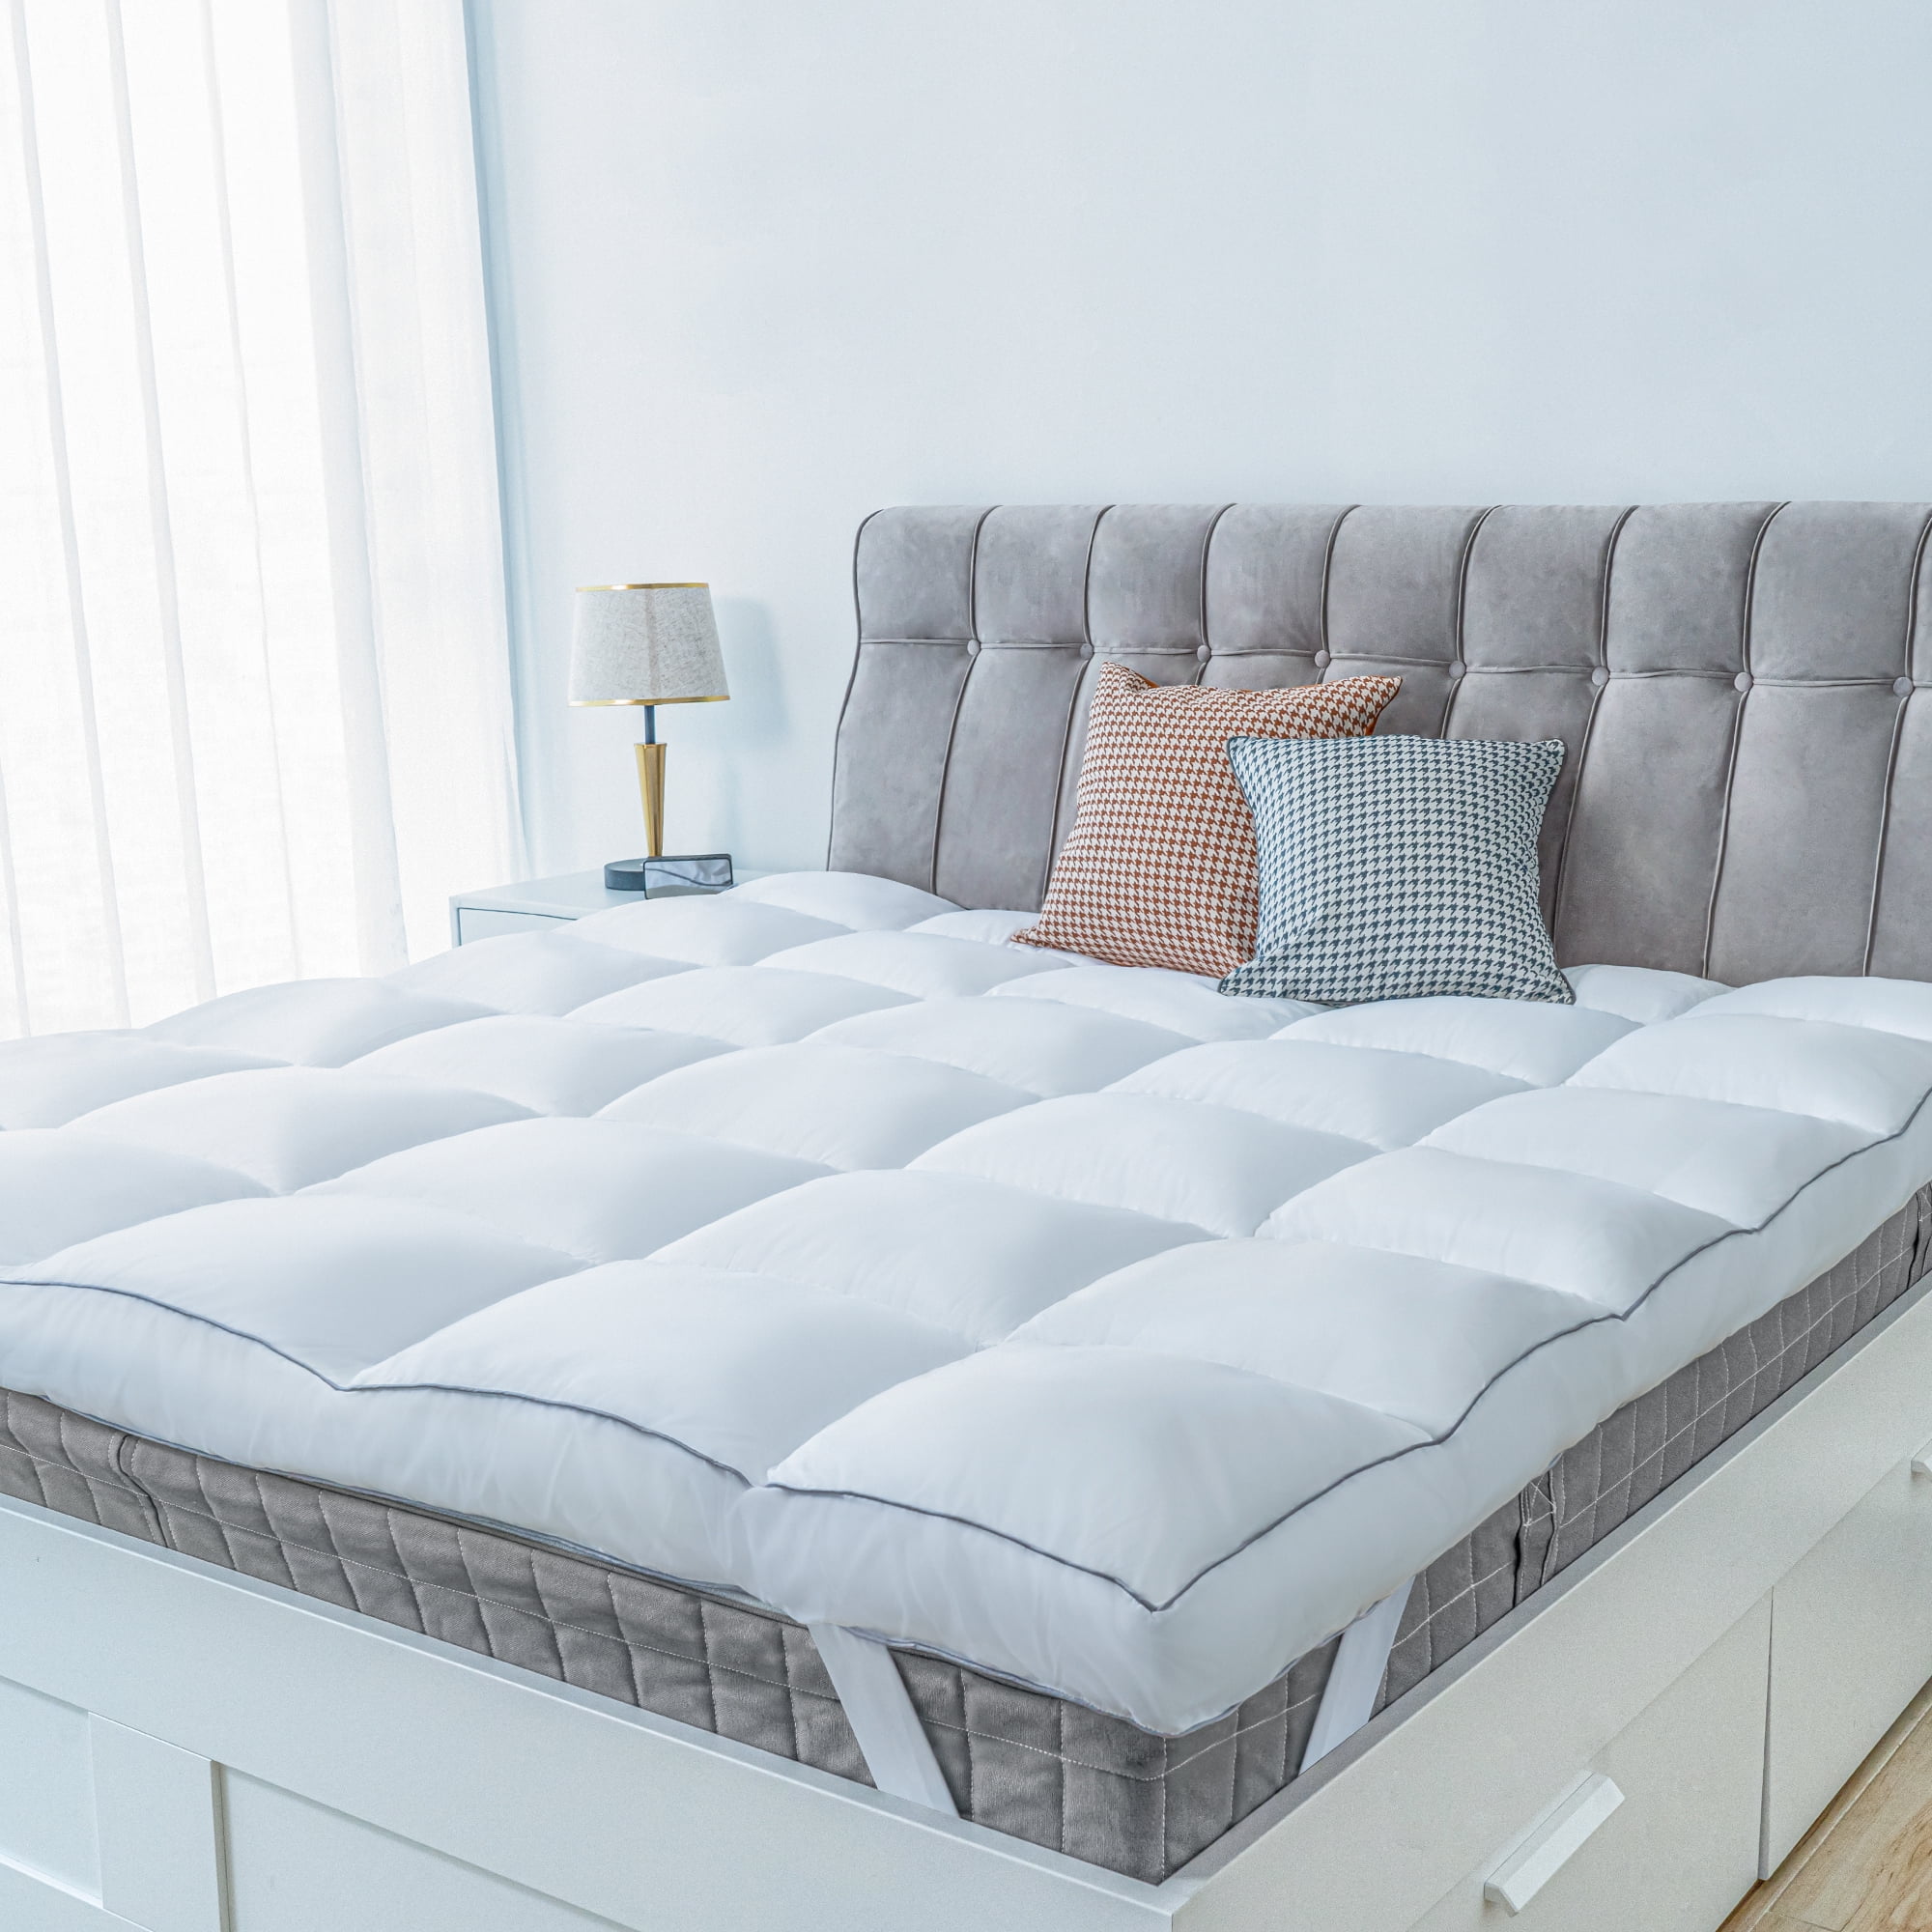 Luxury Loft Mattress Topper with Hollowfibre Fill, 100% Cotton Cover &  Elasticated Straps - Size Single, H12.5 x W90 x D190cm